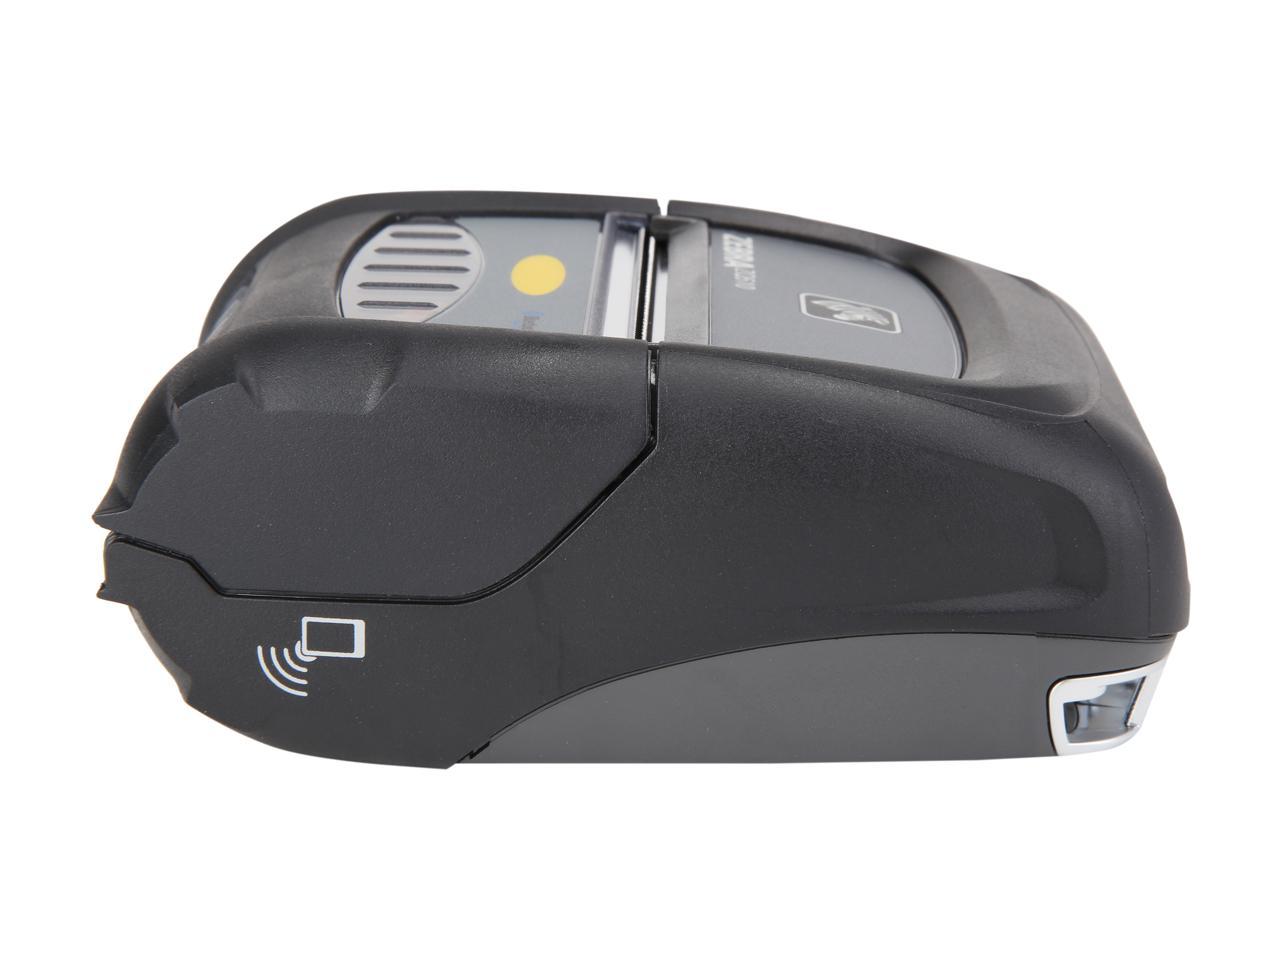 Zebra Zq510 3 Mobile Direct Thermal Receipt And Label Printer 203 Dpi Bluetooth 40 Linered 6606